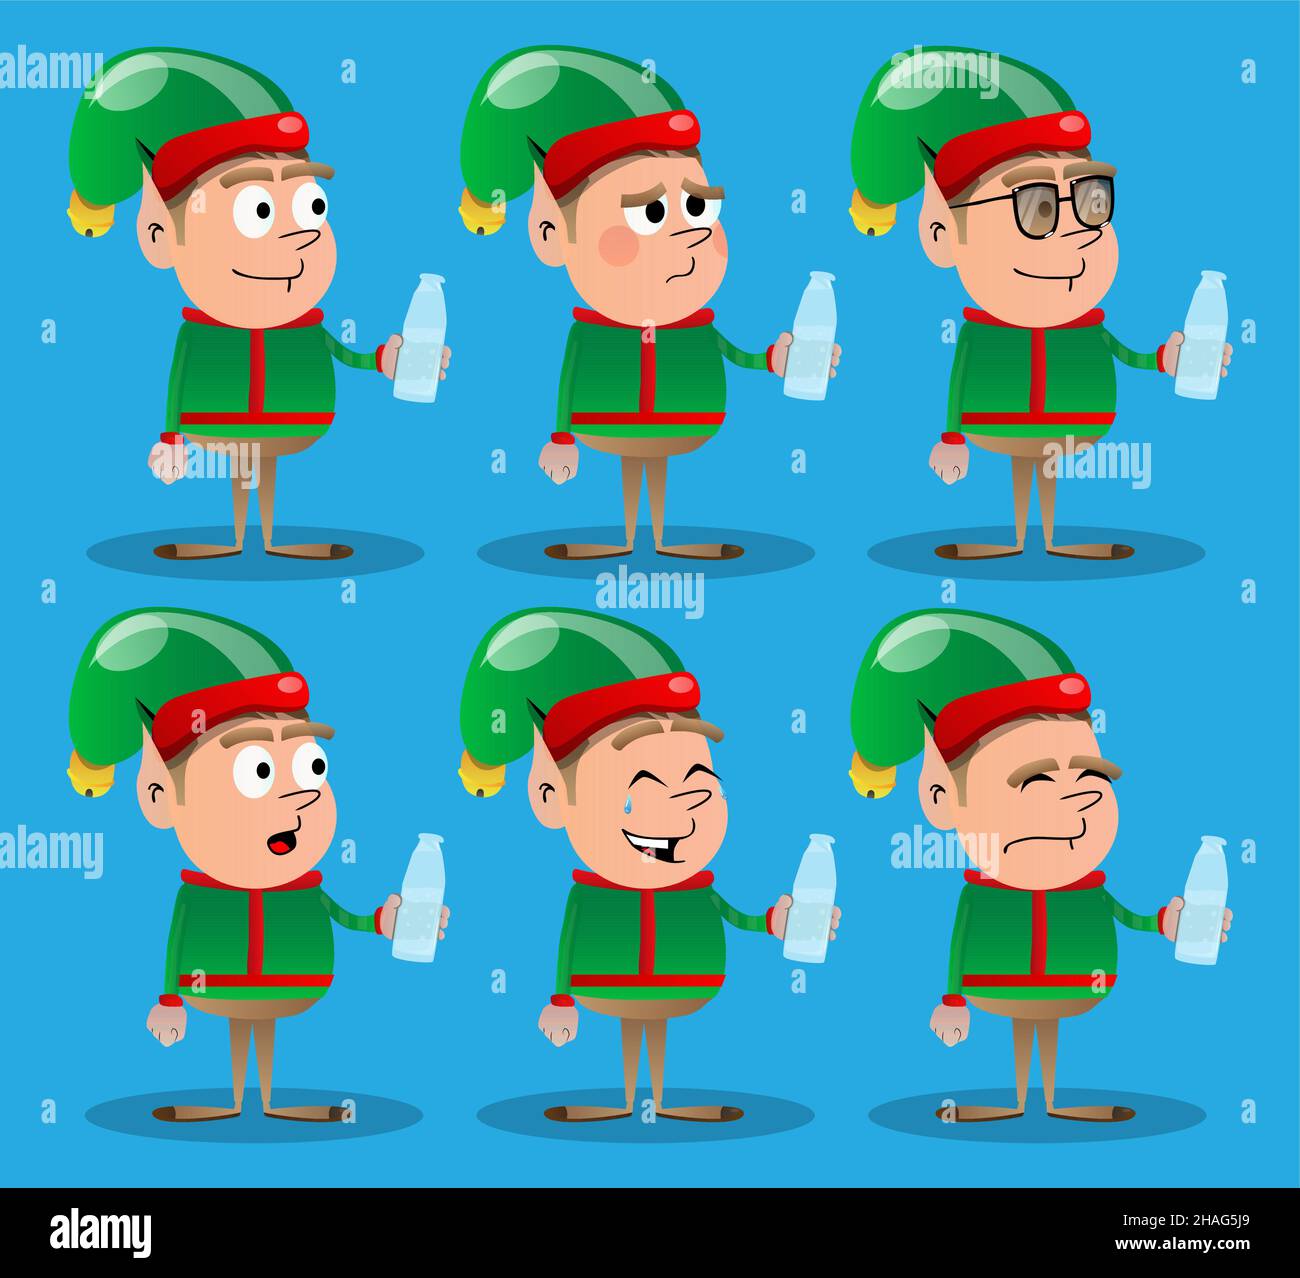 Christmas Elf Drinking Water From A Glass Bottle Vector Cartoon Character Illustration Of Santa 7129